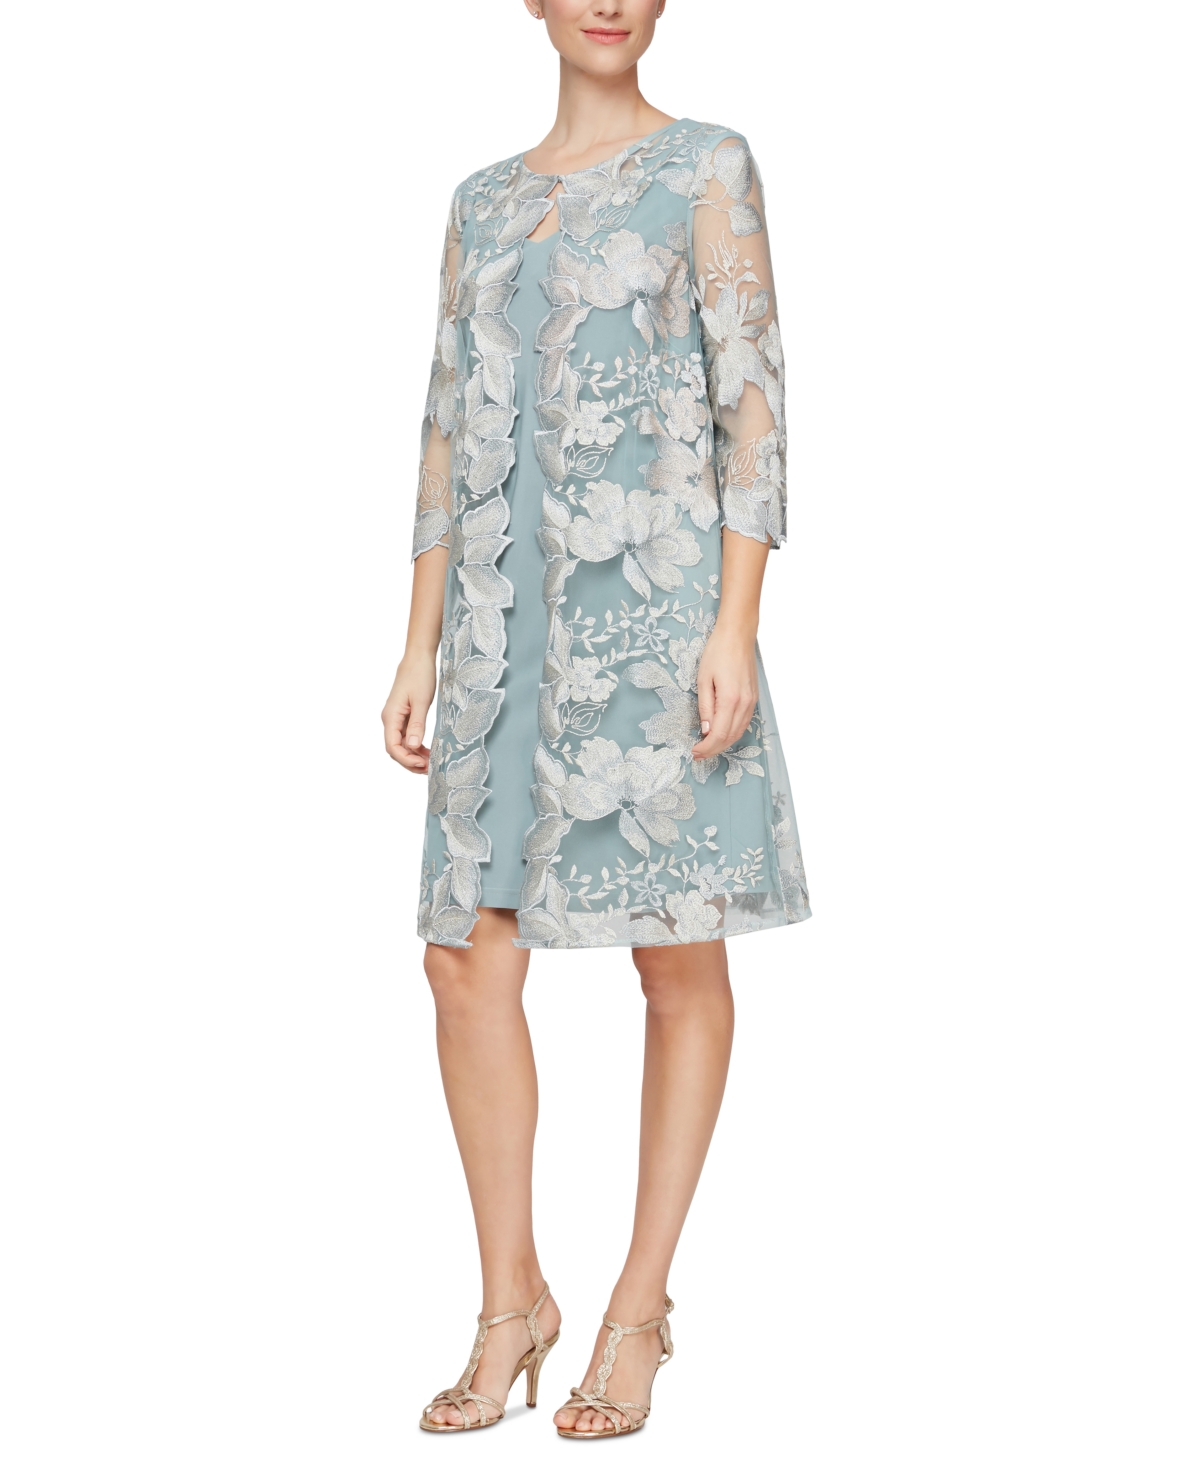 ALEX EVENINGS PETITE LAYERED-LOOK EMBROIDERED JACKET DRESS